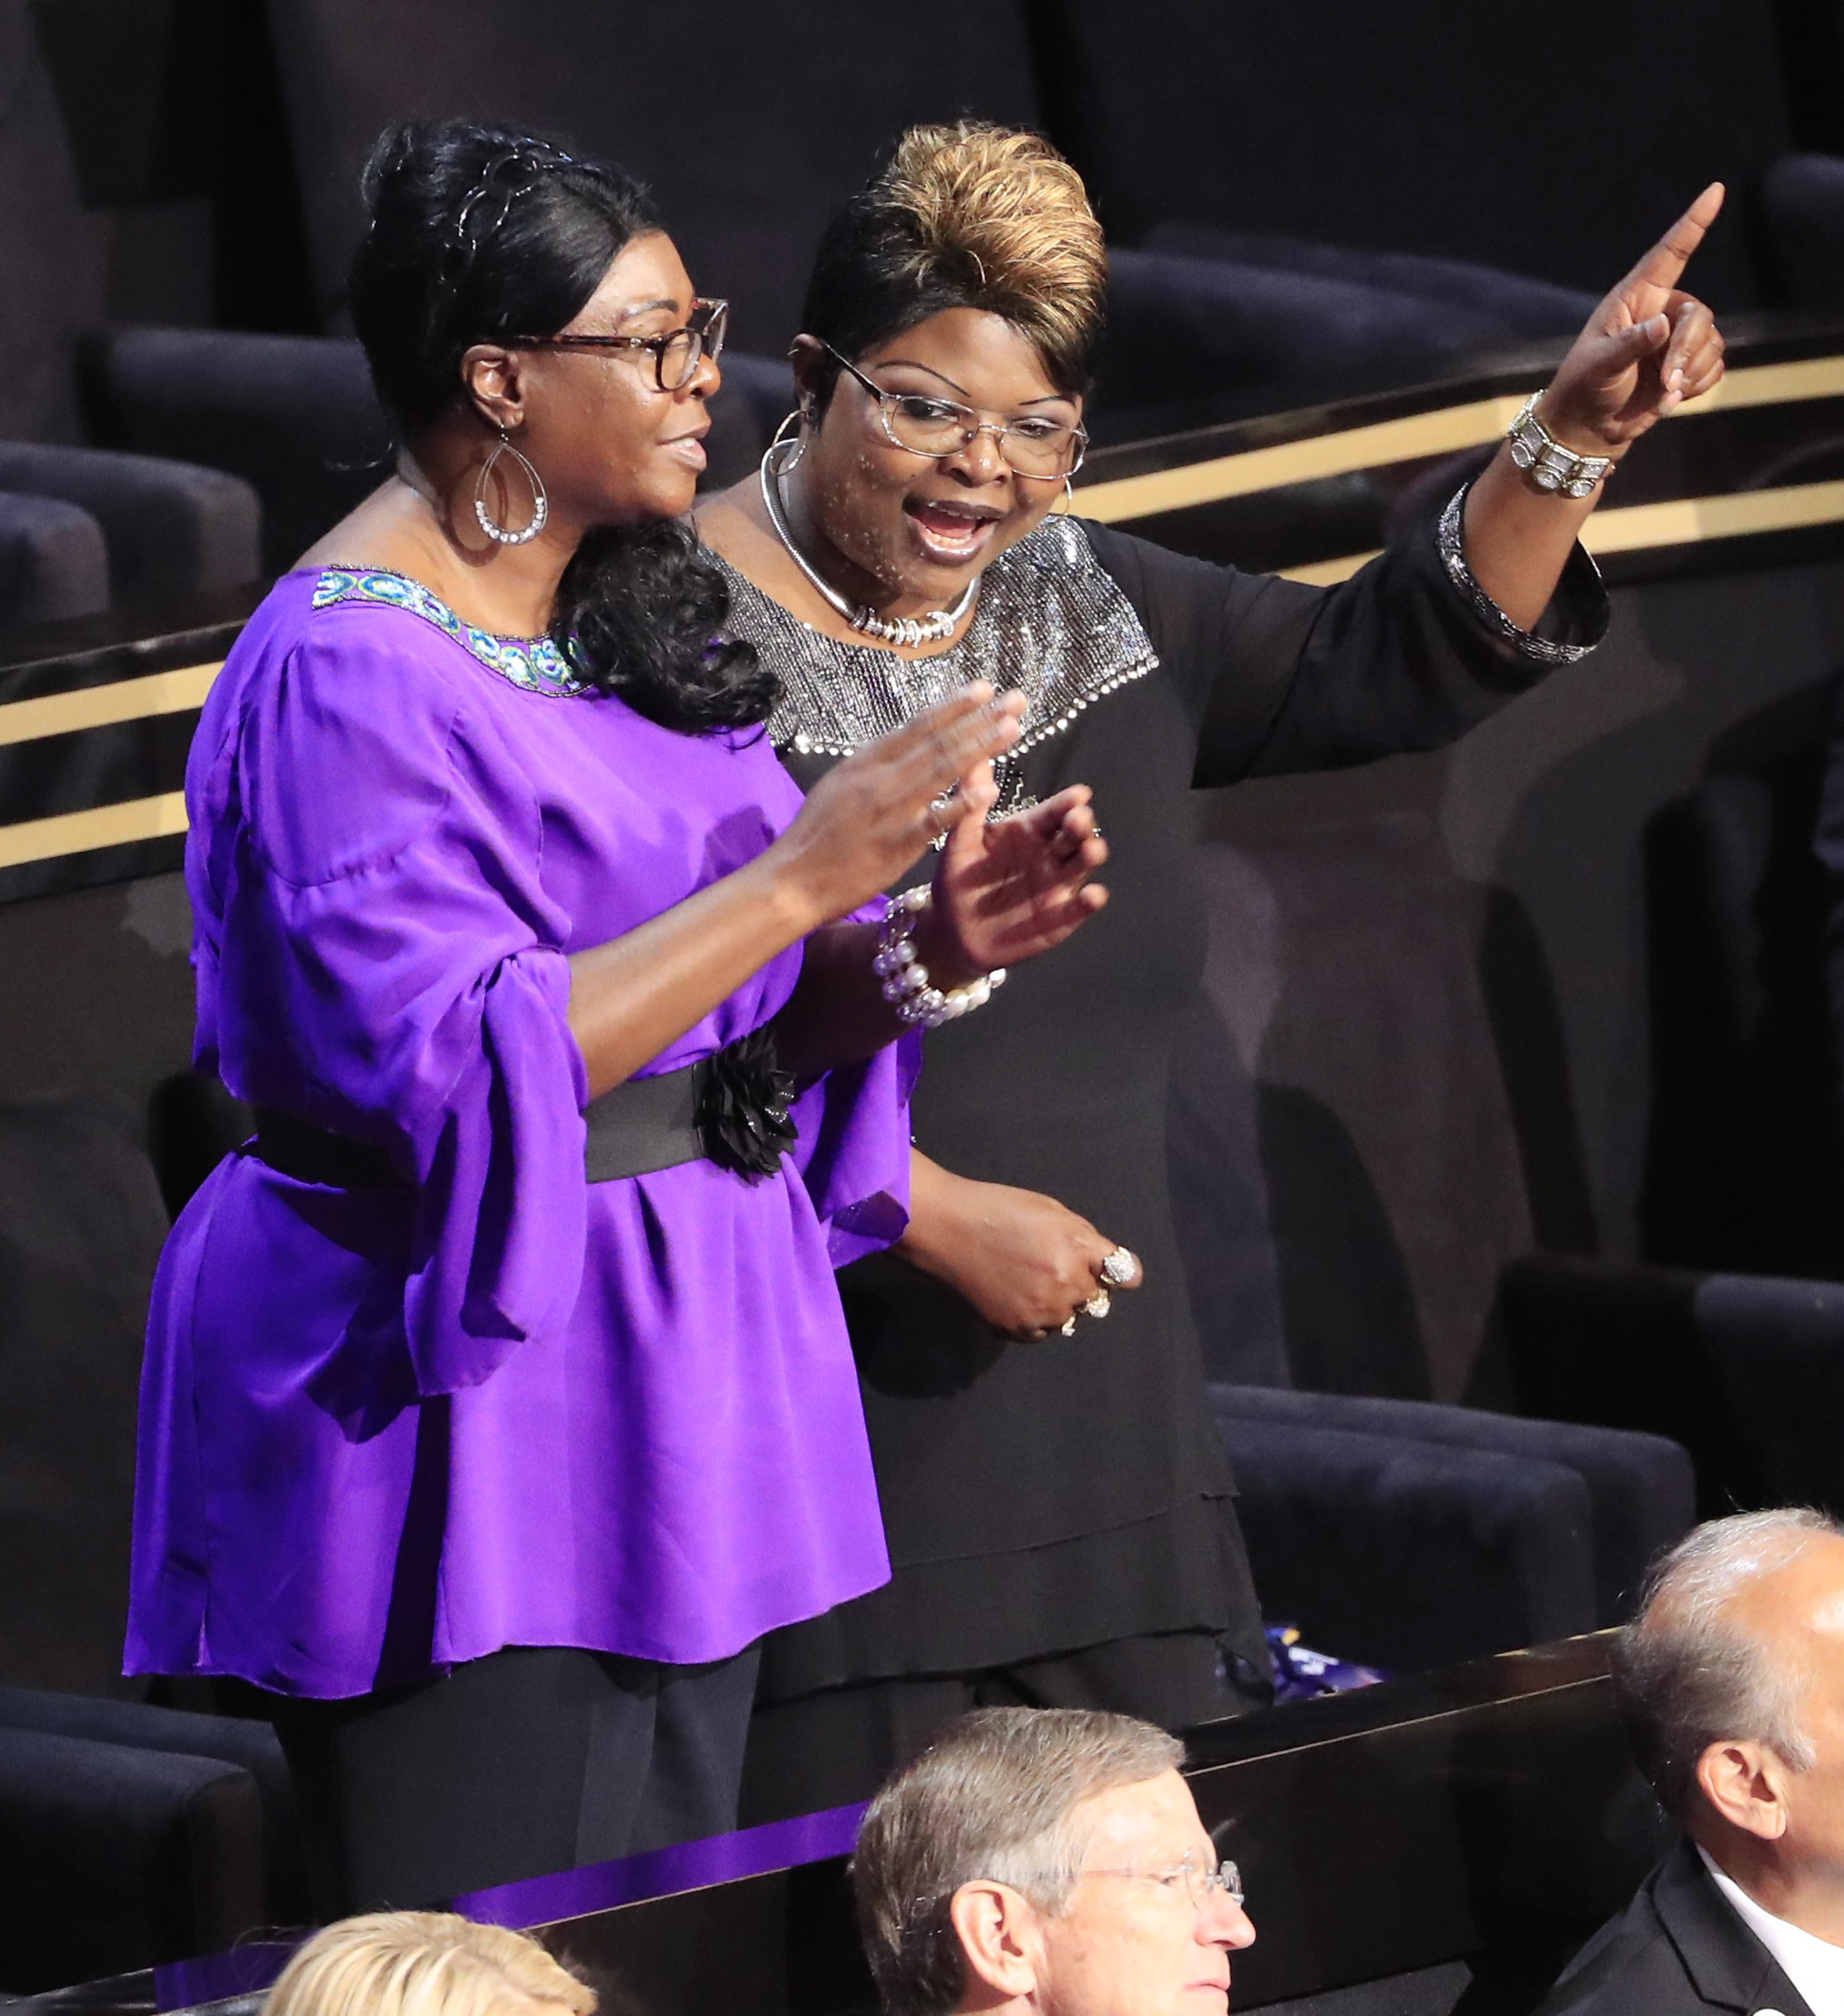 Lynette Hardaway and Rochelle Richardson, known as Diamond and Silk, at the Republican National Convention at Quicken Loans Arena in Cleveland on July 21, 2016 (Tannen Maury—EPA/REX/Shutterstock)